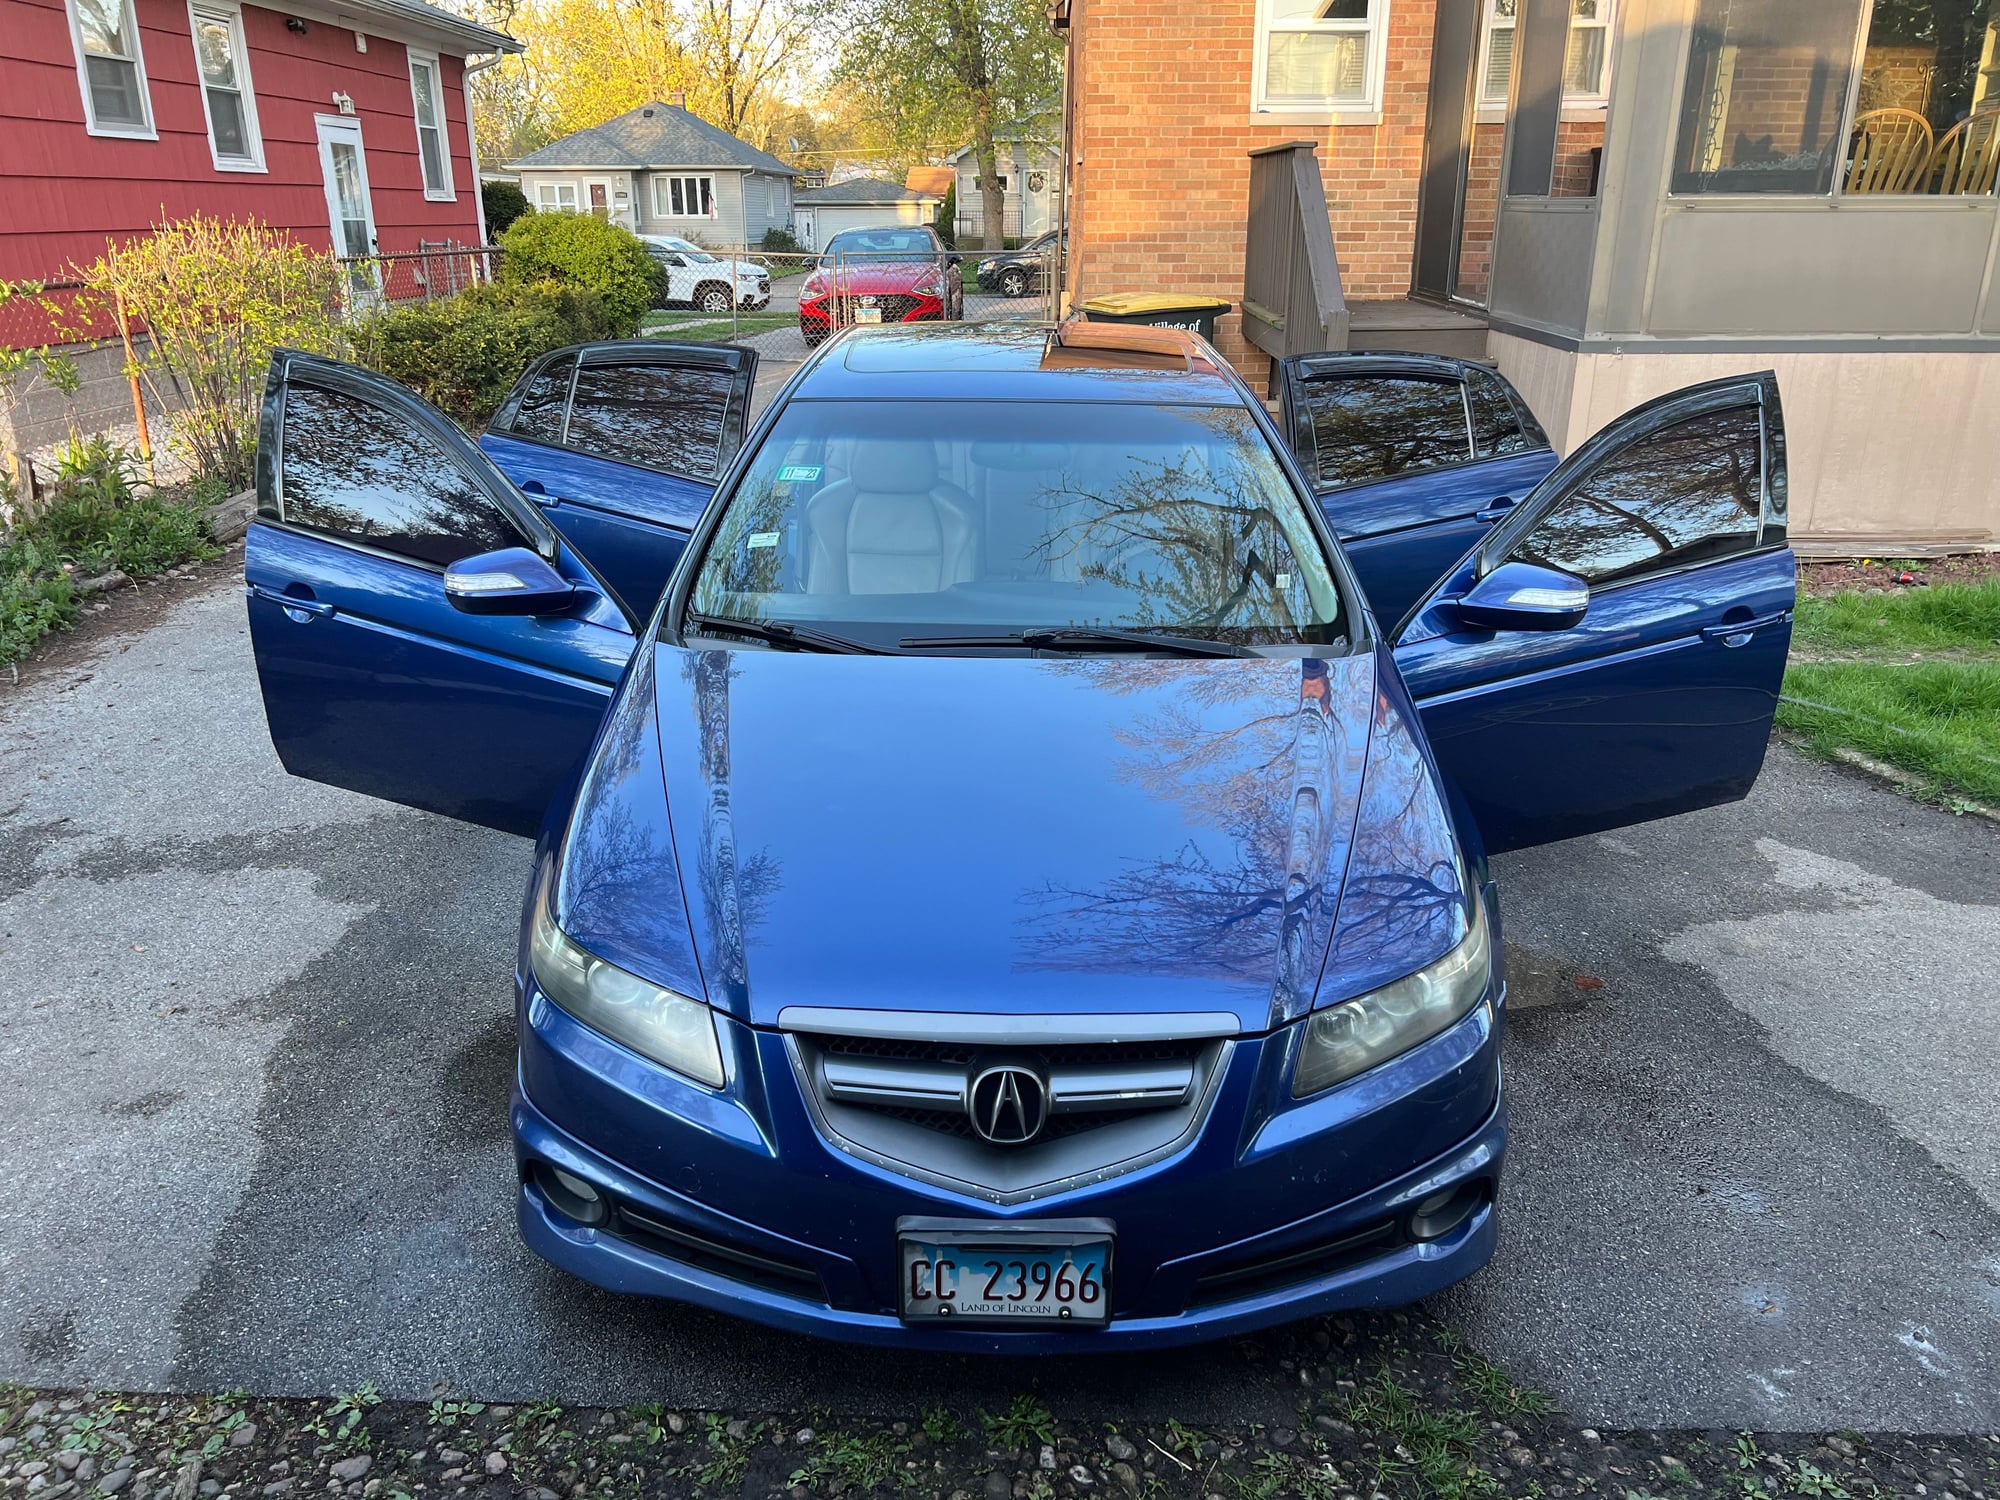 2007 Acura TL - FS: KBP j37 TL Type S - Used - VIN 19UUA76537A000171 - 146,000 Miles - 6 cyl - 2WD - Automatic - Sedan - Blue - Chicago, IL 60617, United States